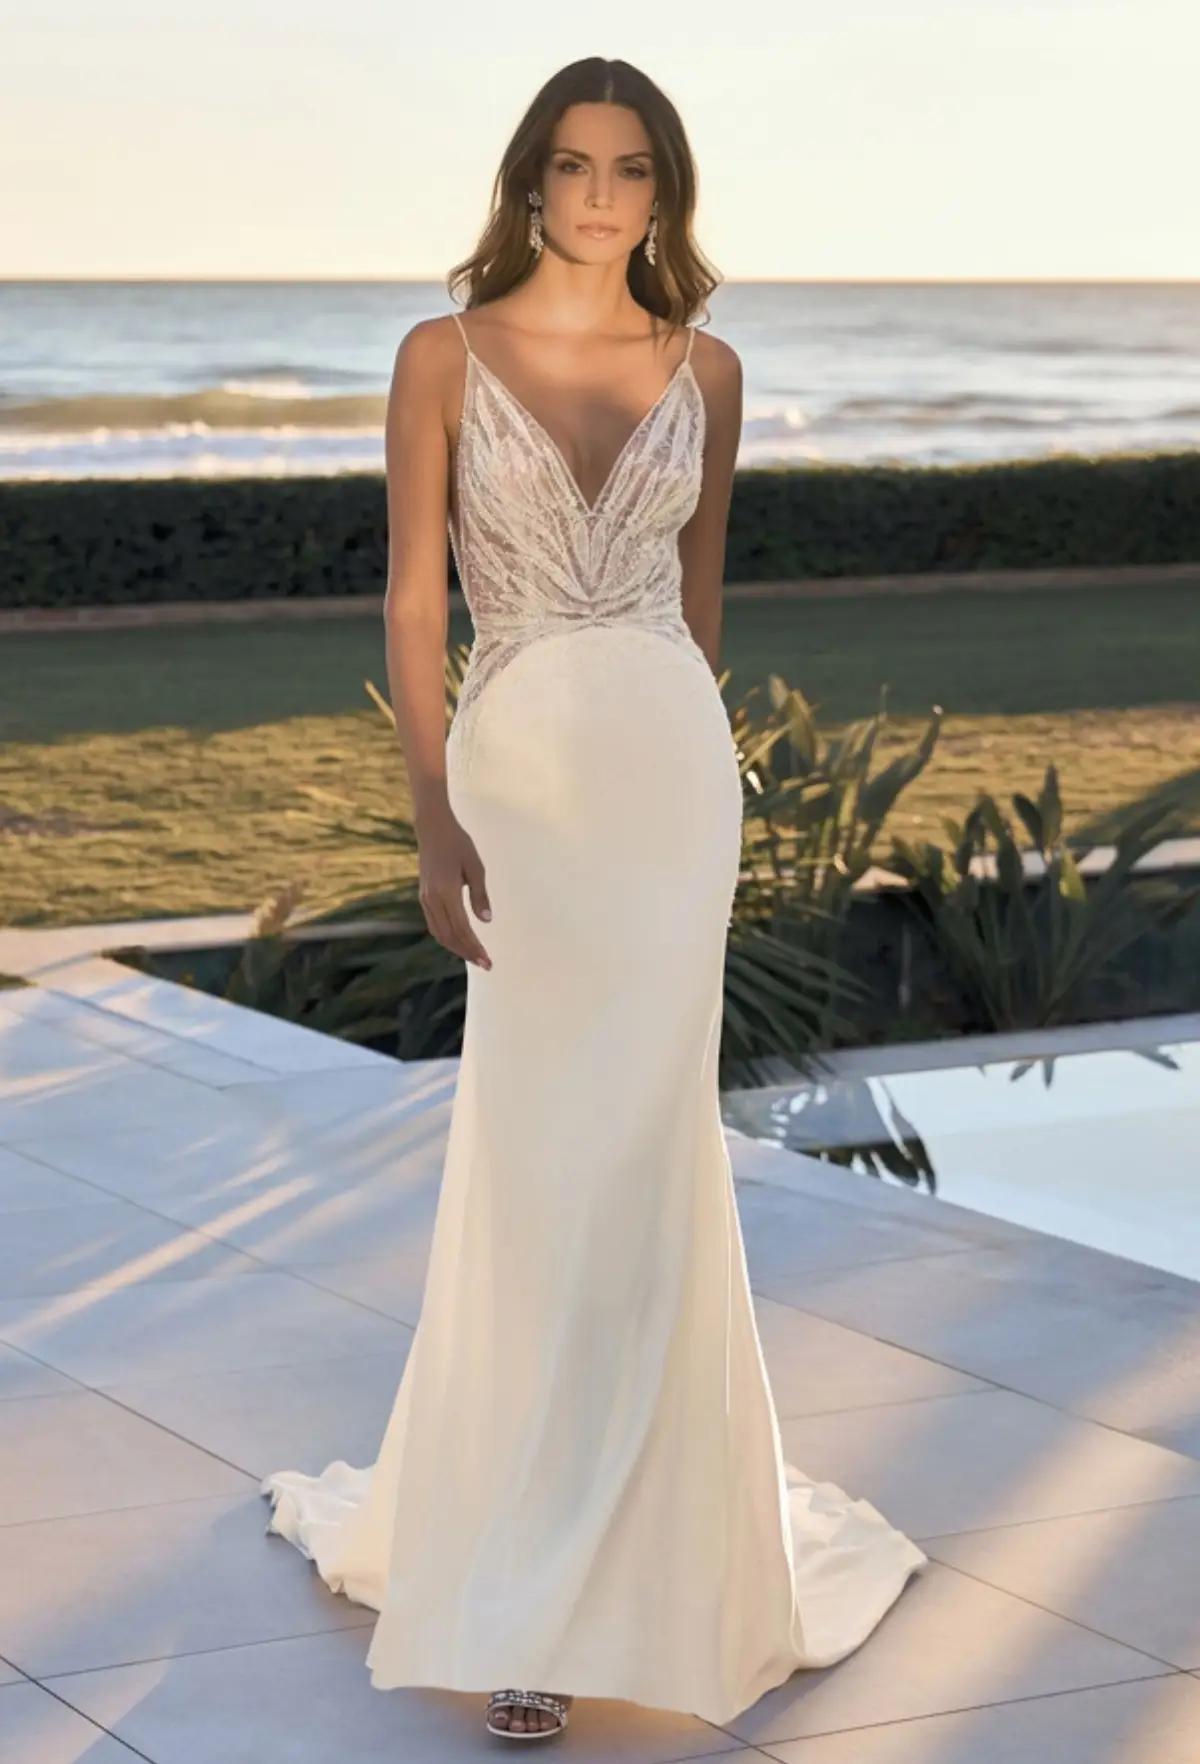 Model wearing a white gown by Pronovias